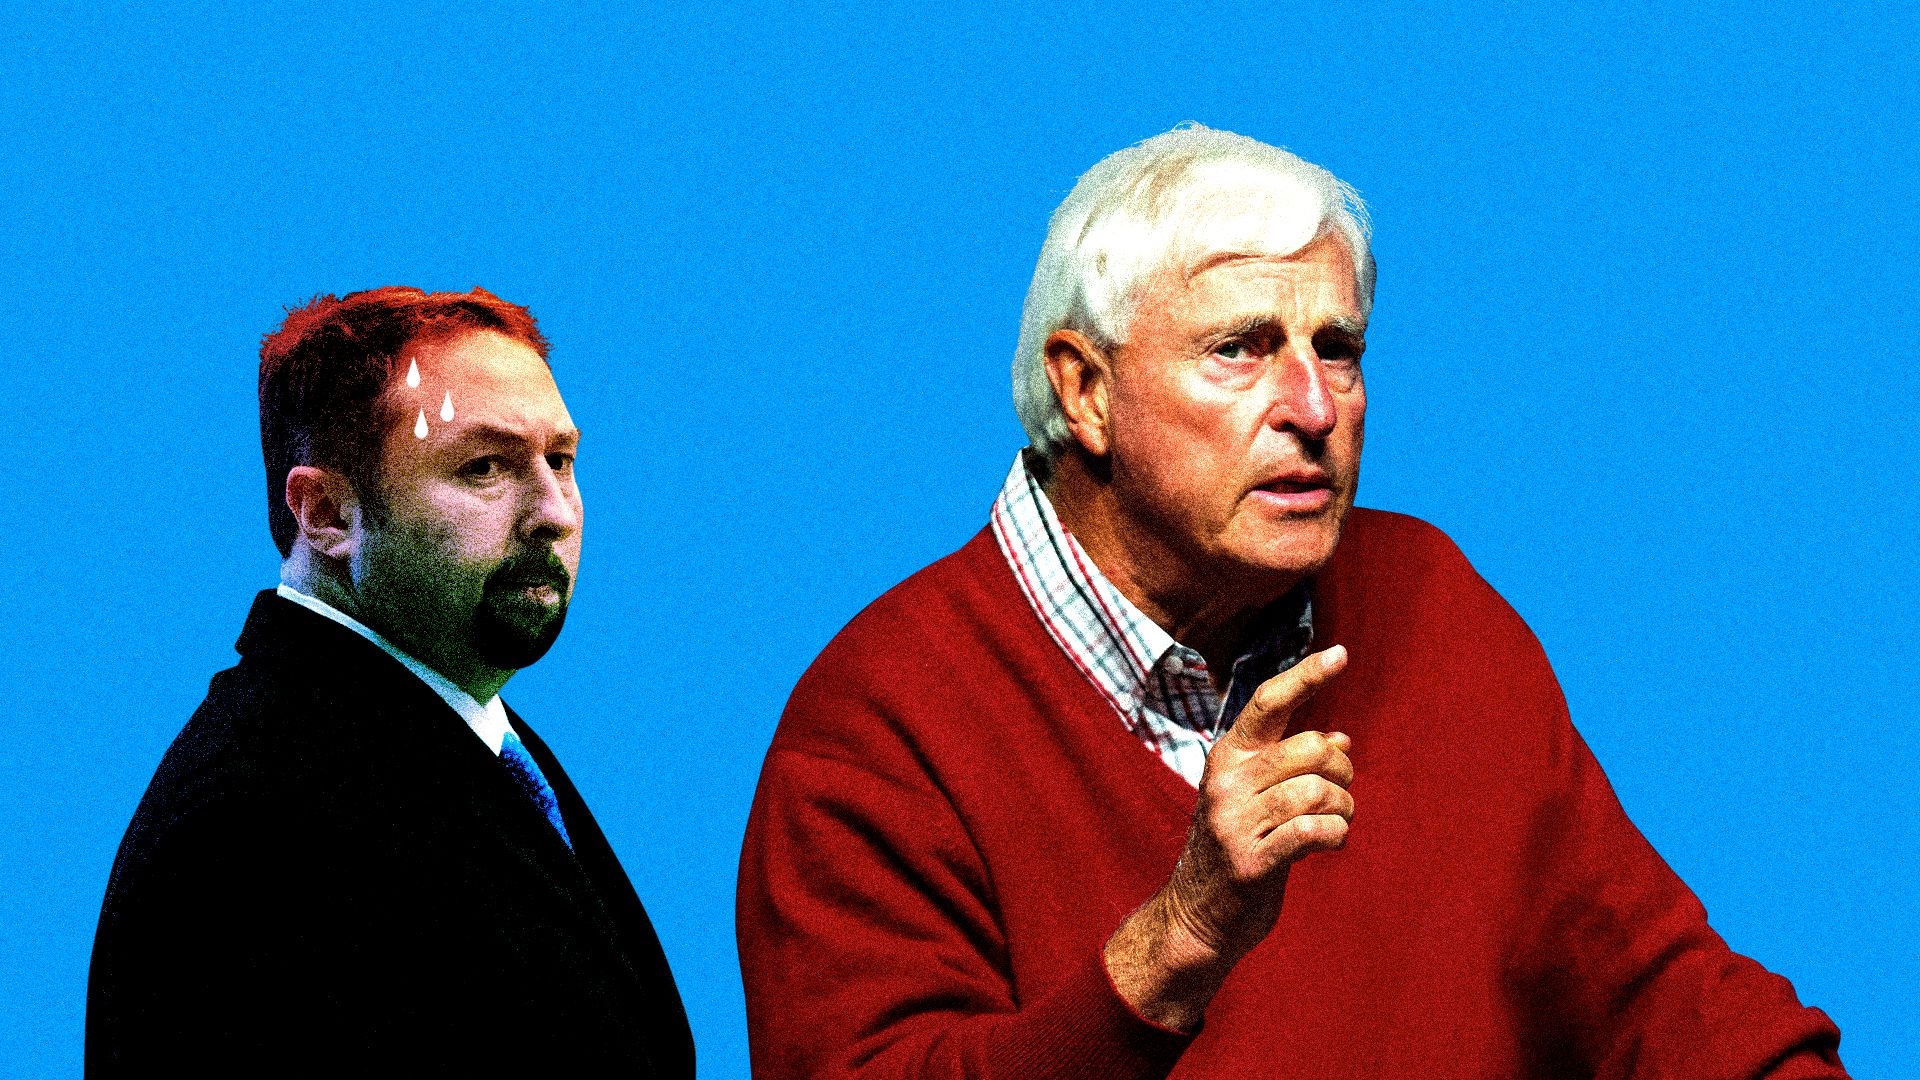 Jason Miller sweating as he stands beside the legendary college basketball coach Bobby Knight.